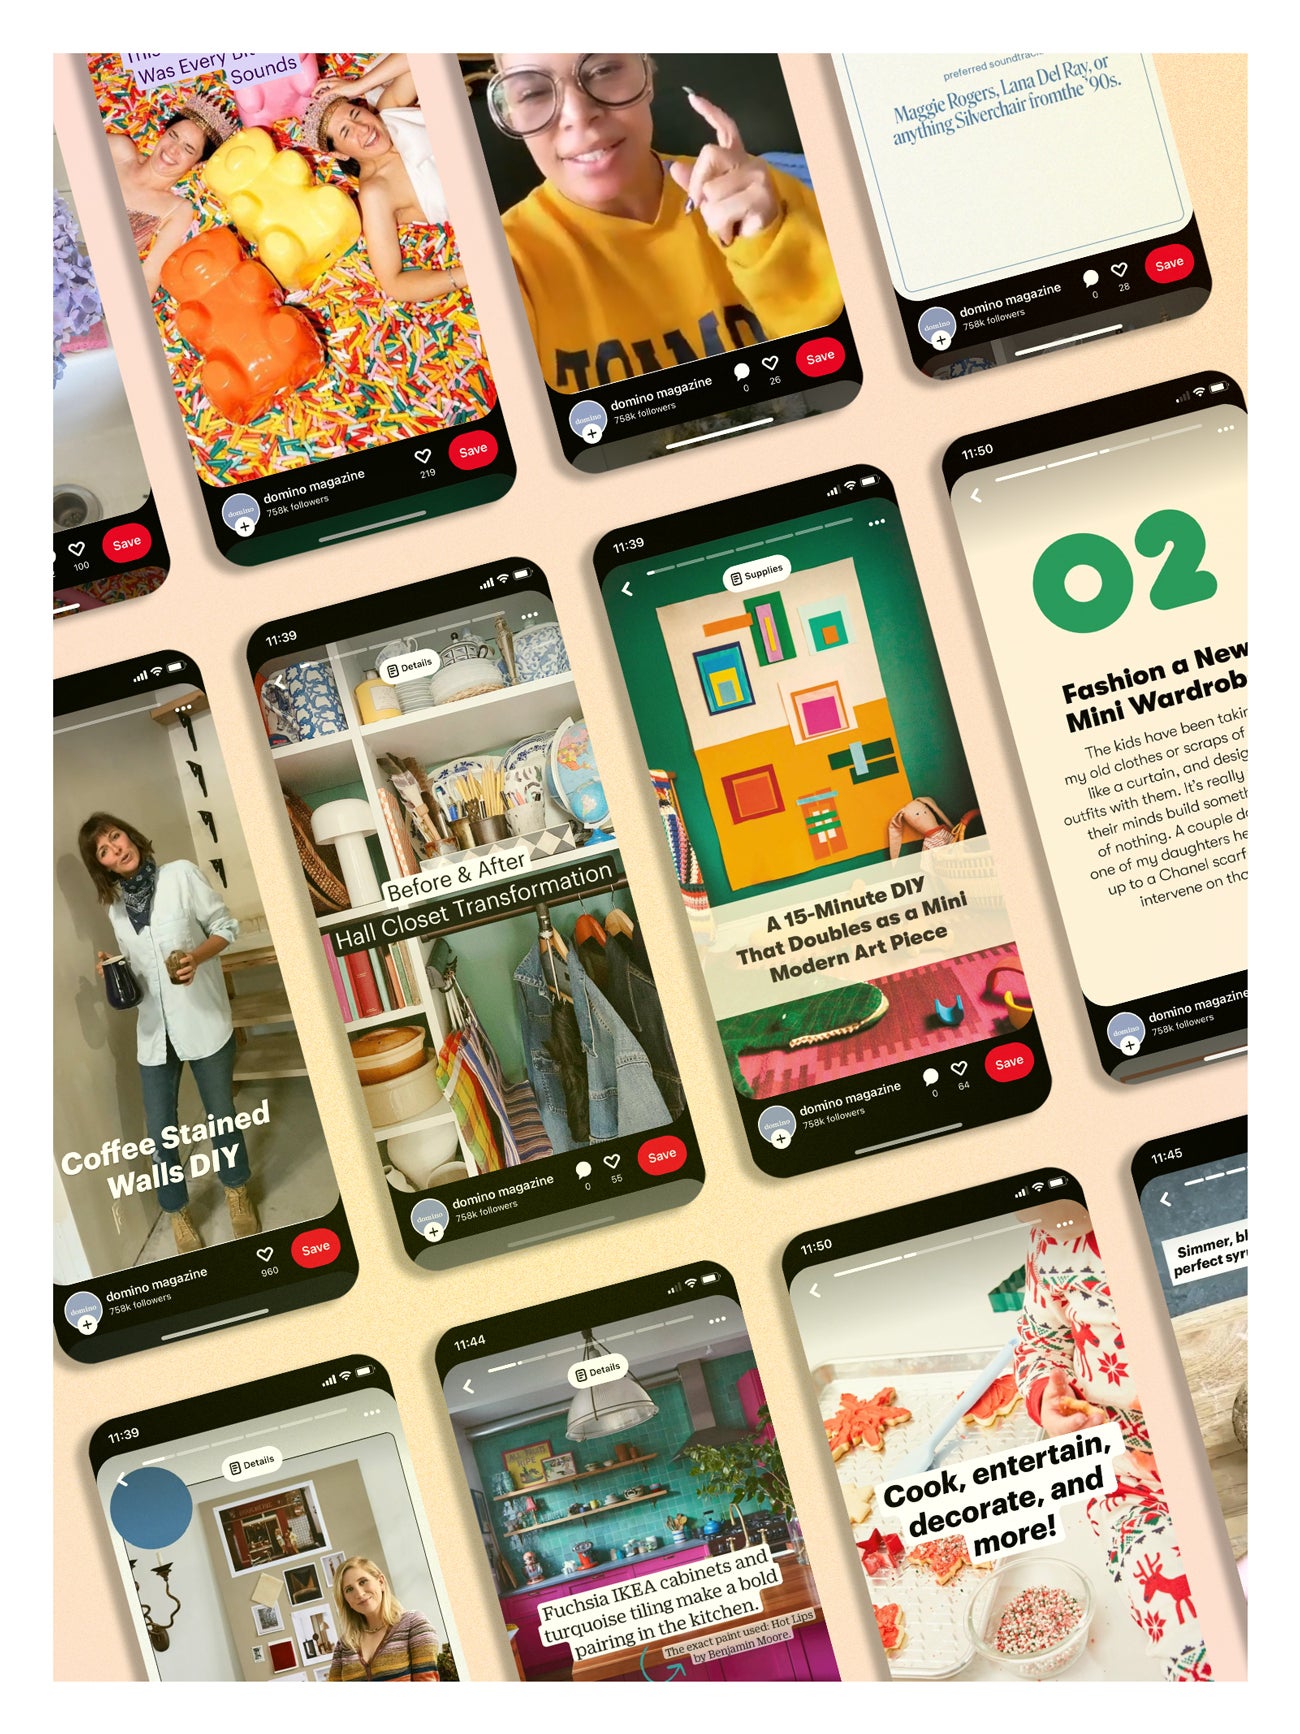 Camera-Shy Content Creators Will Love Pinterest’s Newest Feature